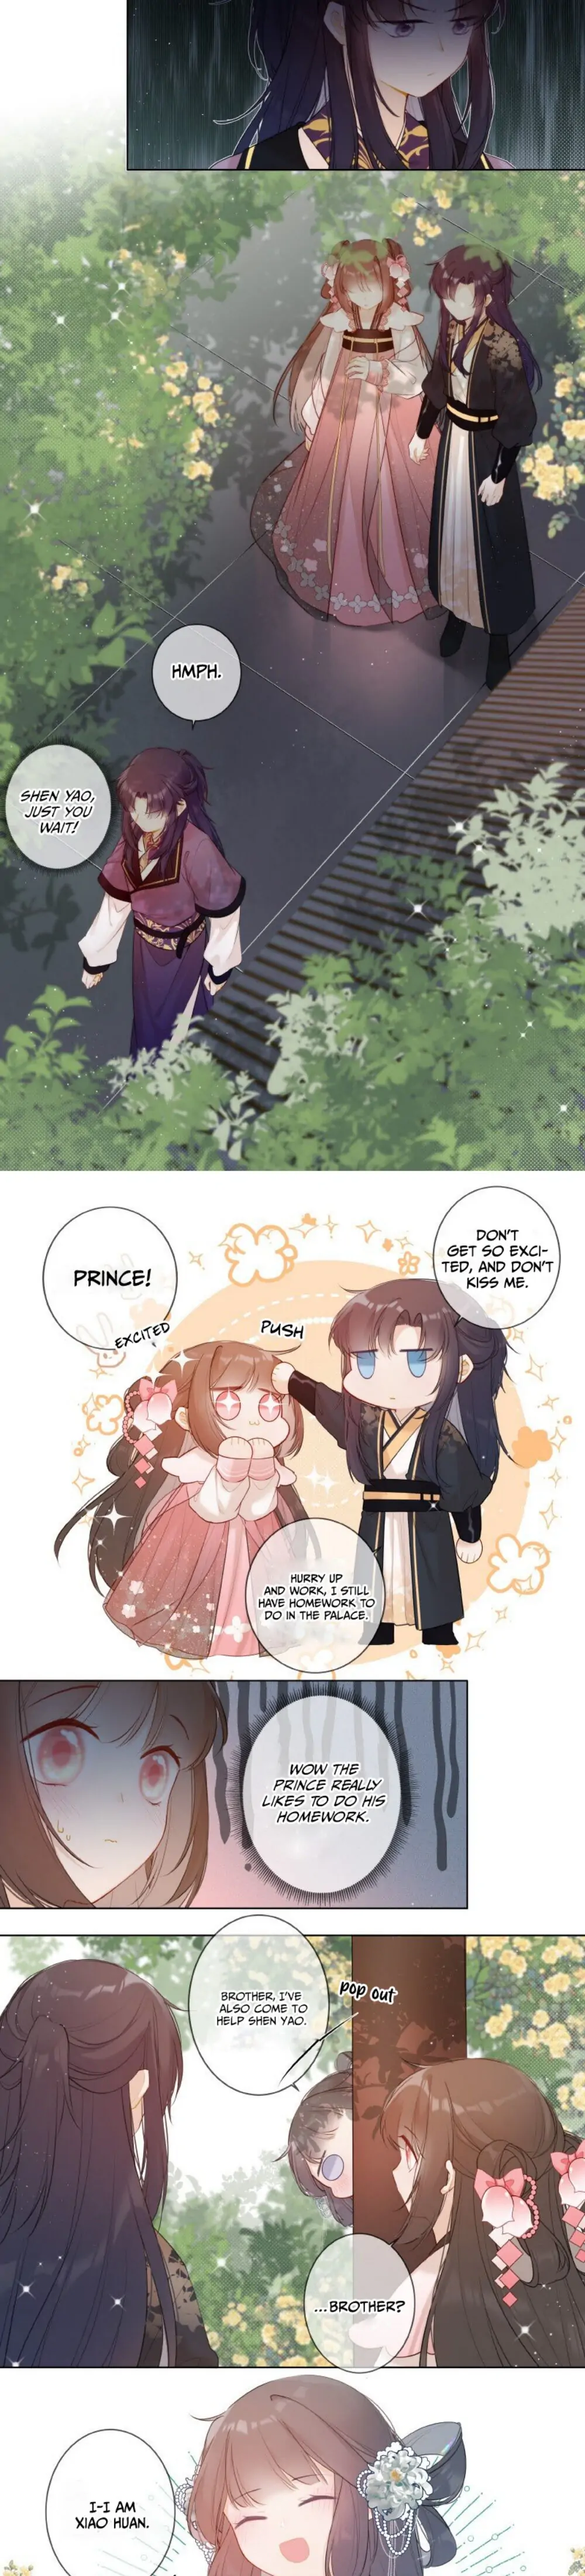 Crown Prince Has A Sweetheart chapter 5